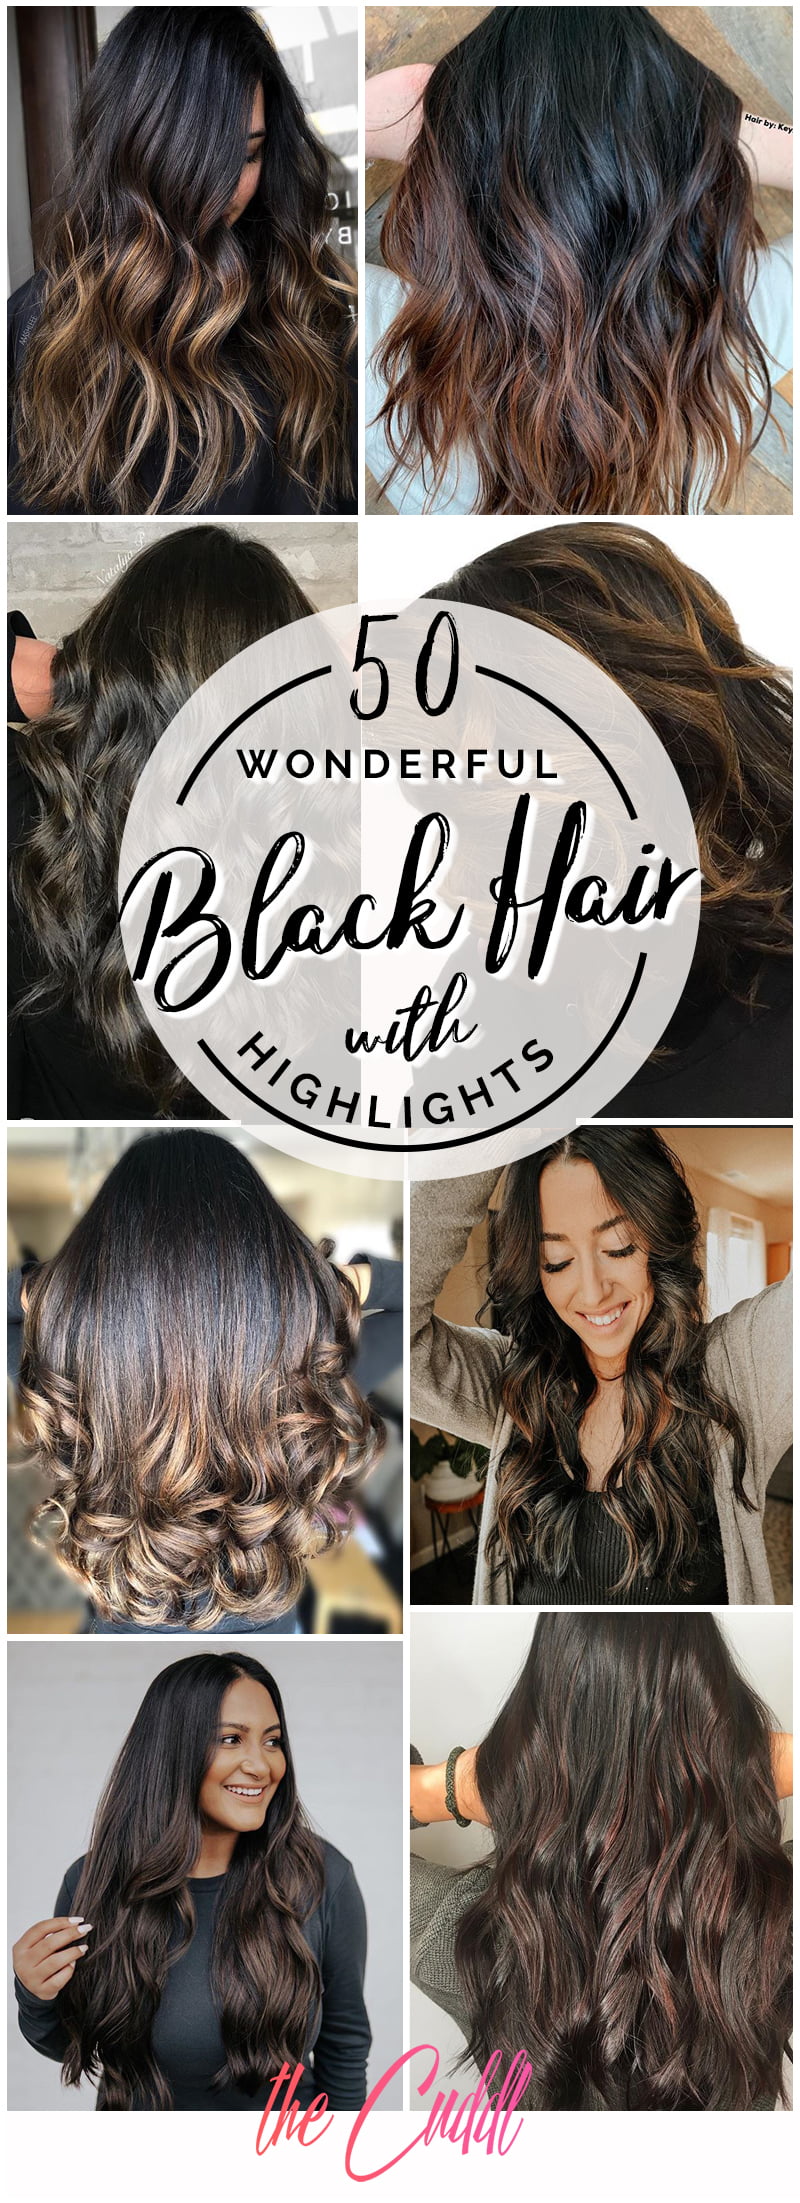 Black Hair Styles With Highlights